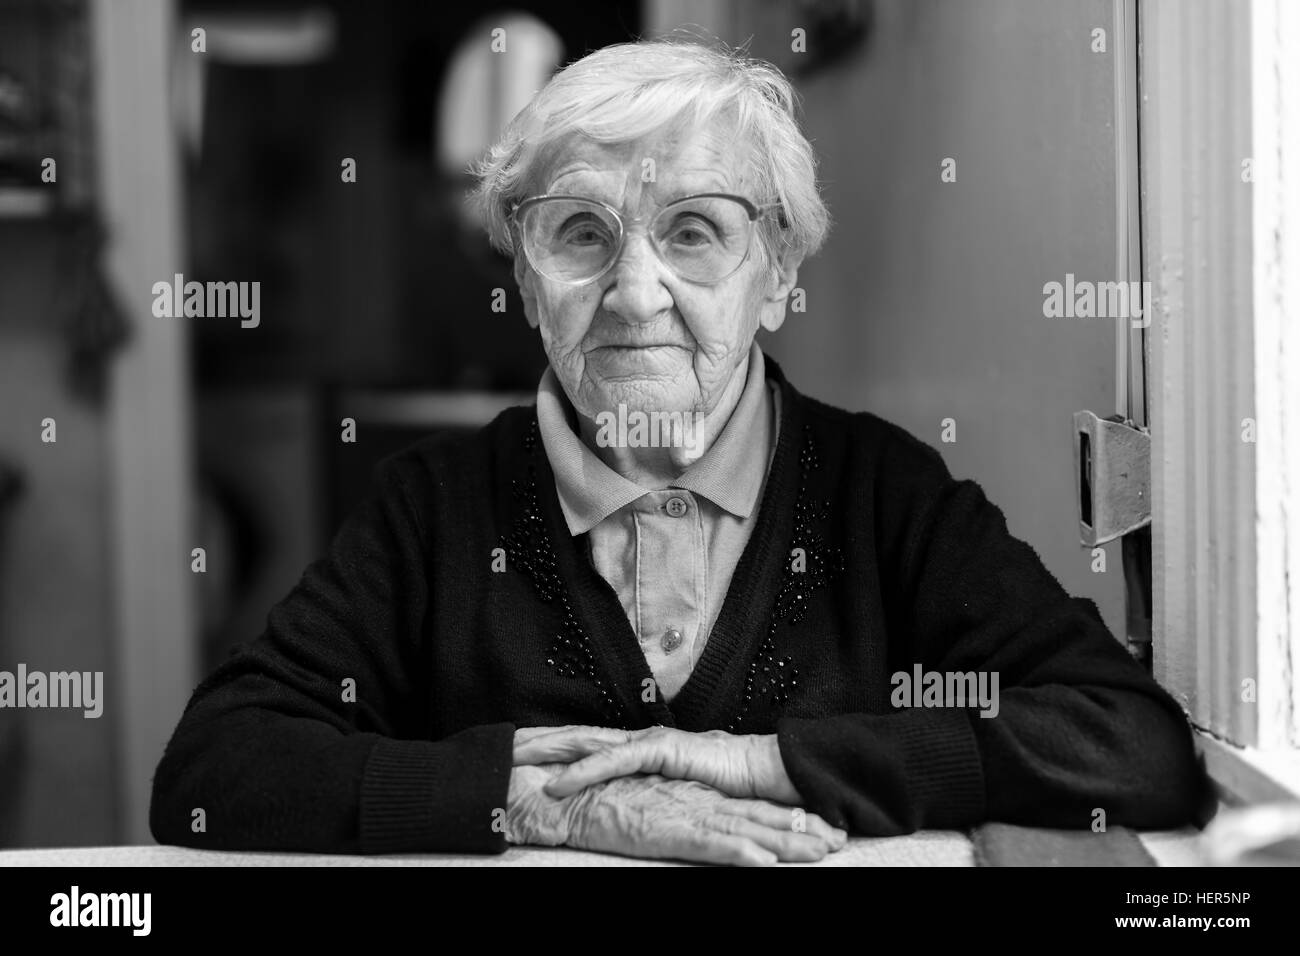 Old woman in glasses sitting in the house. Stock Photo